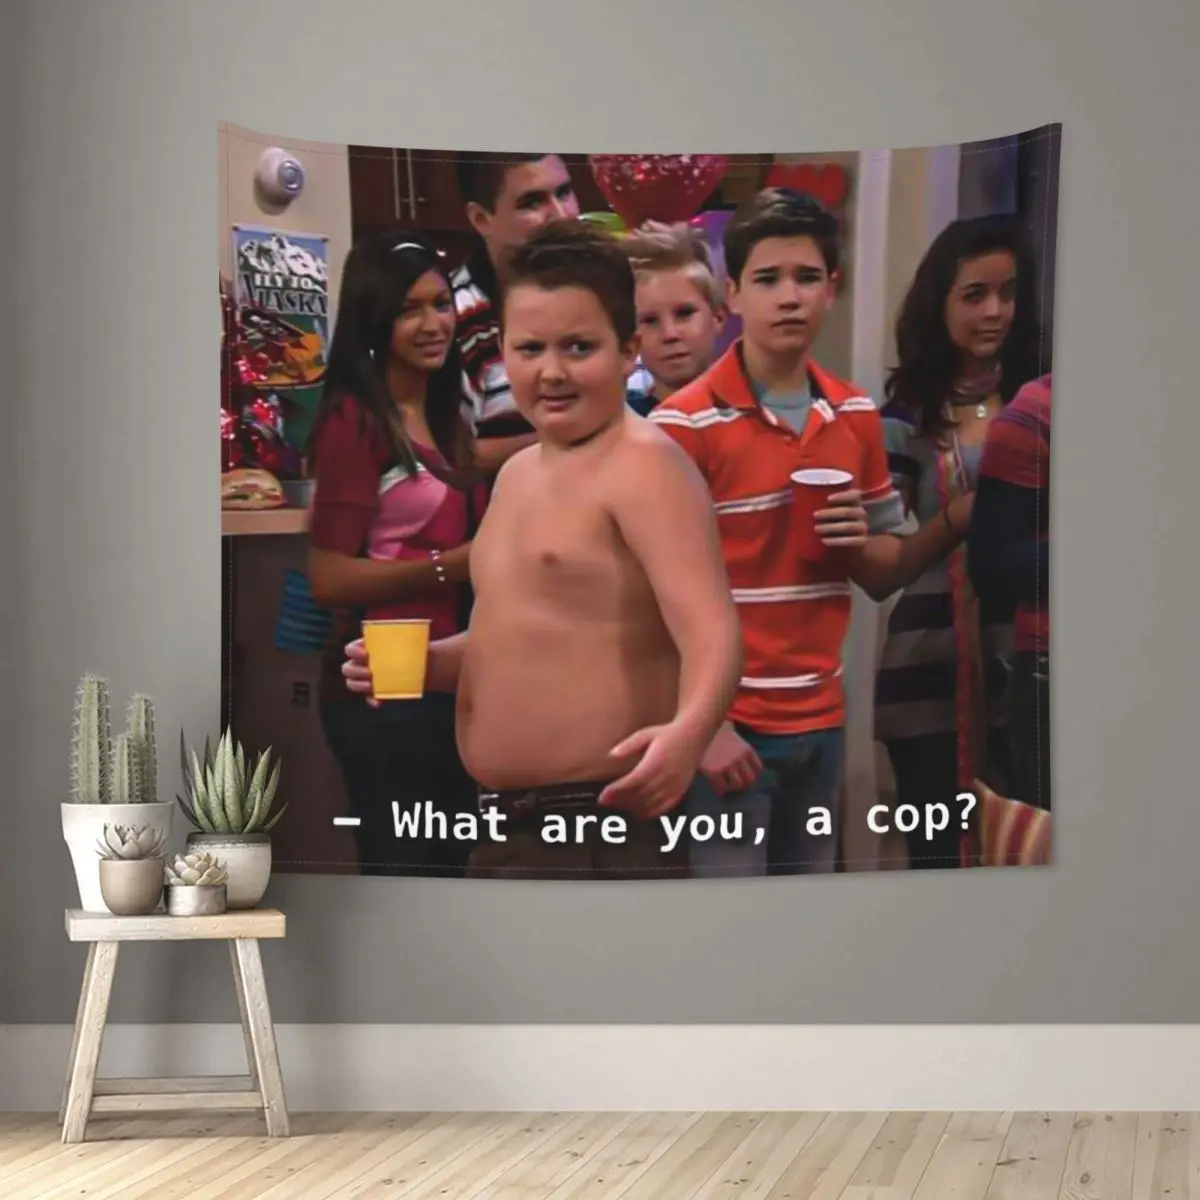 

Gibby What Are You A Cop Tapestry Wall Hanging Hippie Fabric Tapestries INS Decoration Room Decor Yoga Mat